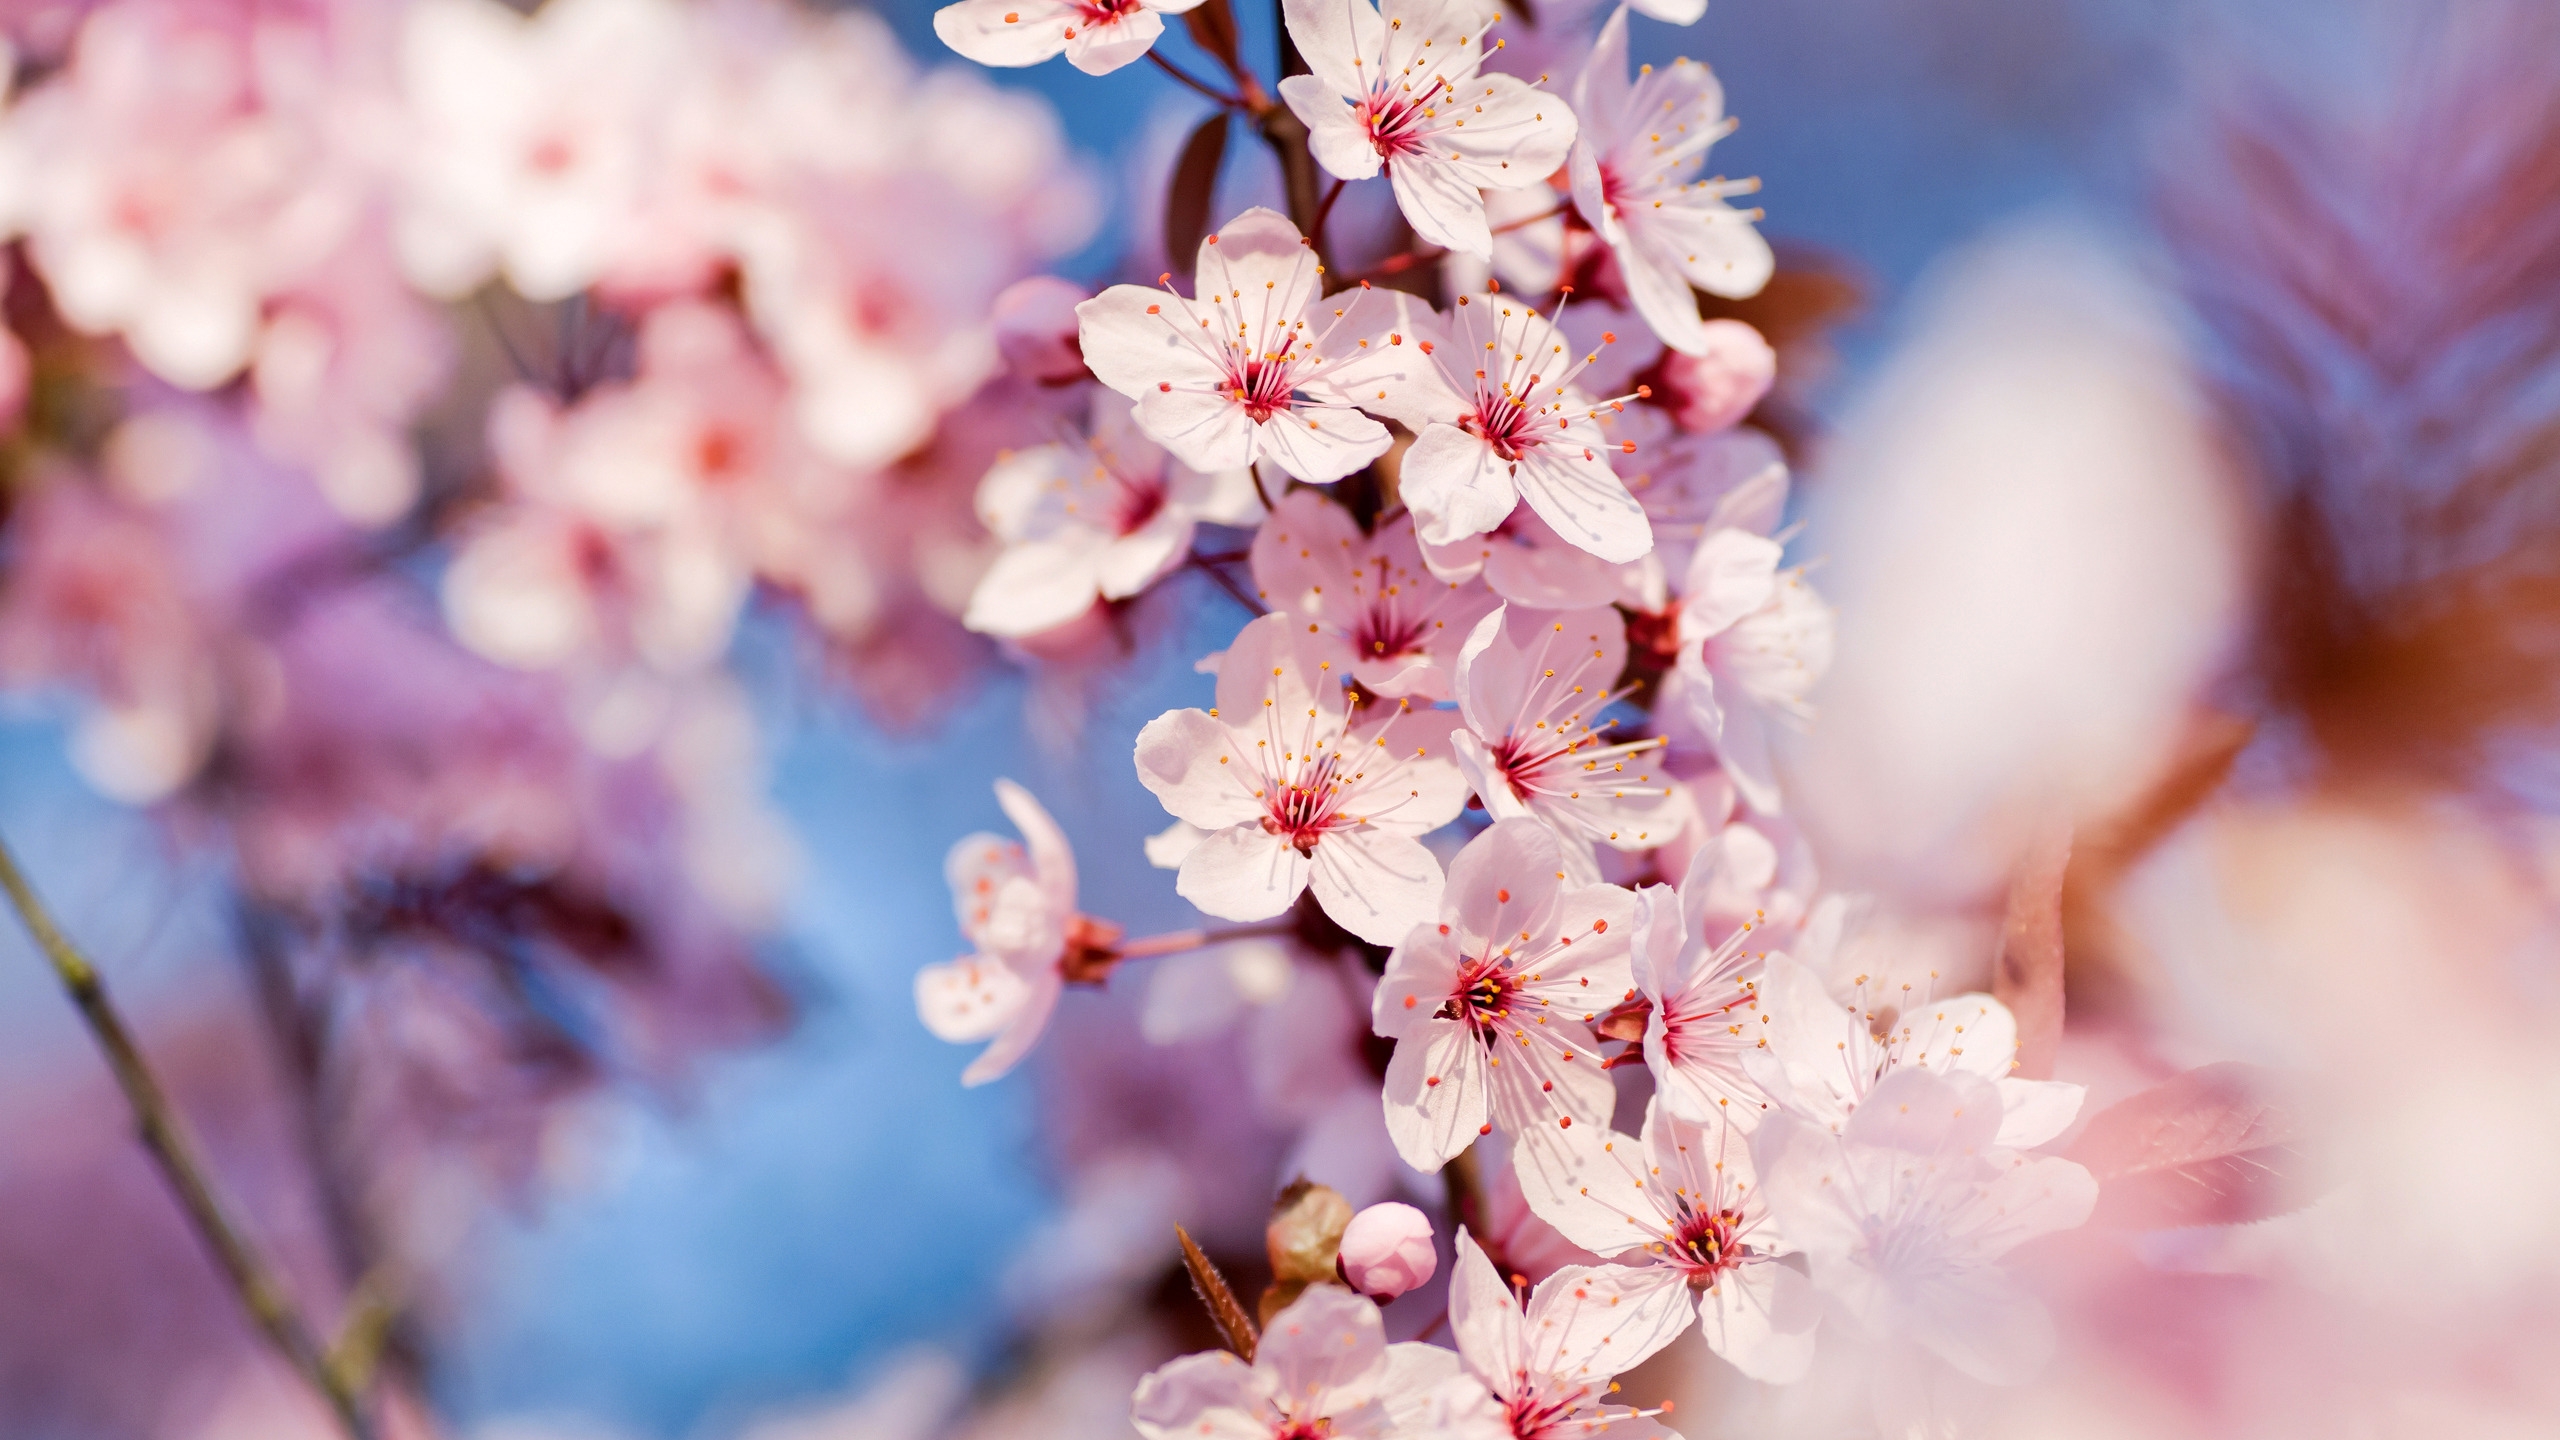 Cherry Blossoms for 2560x1440 HDTV resolution